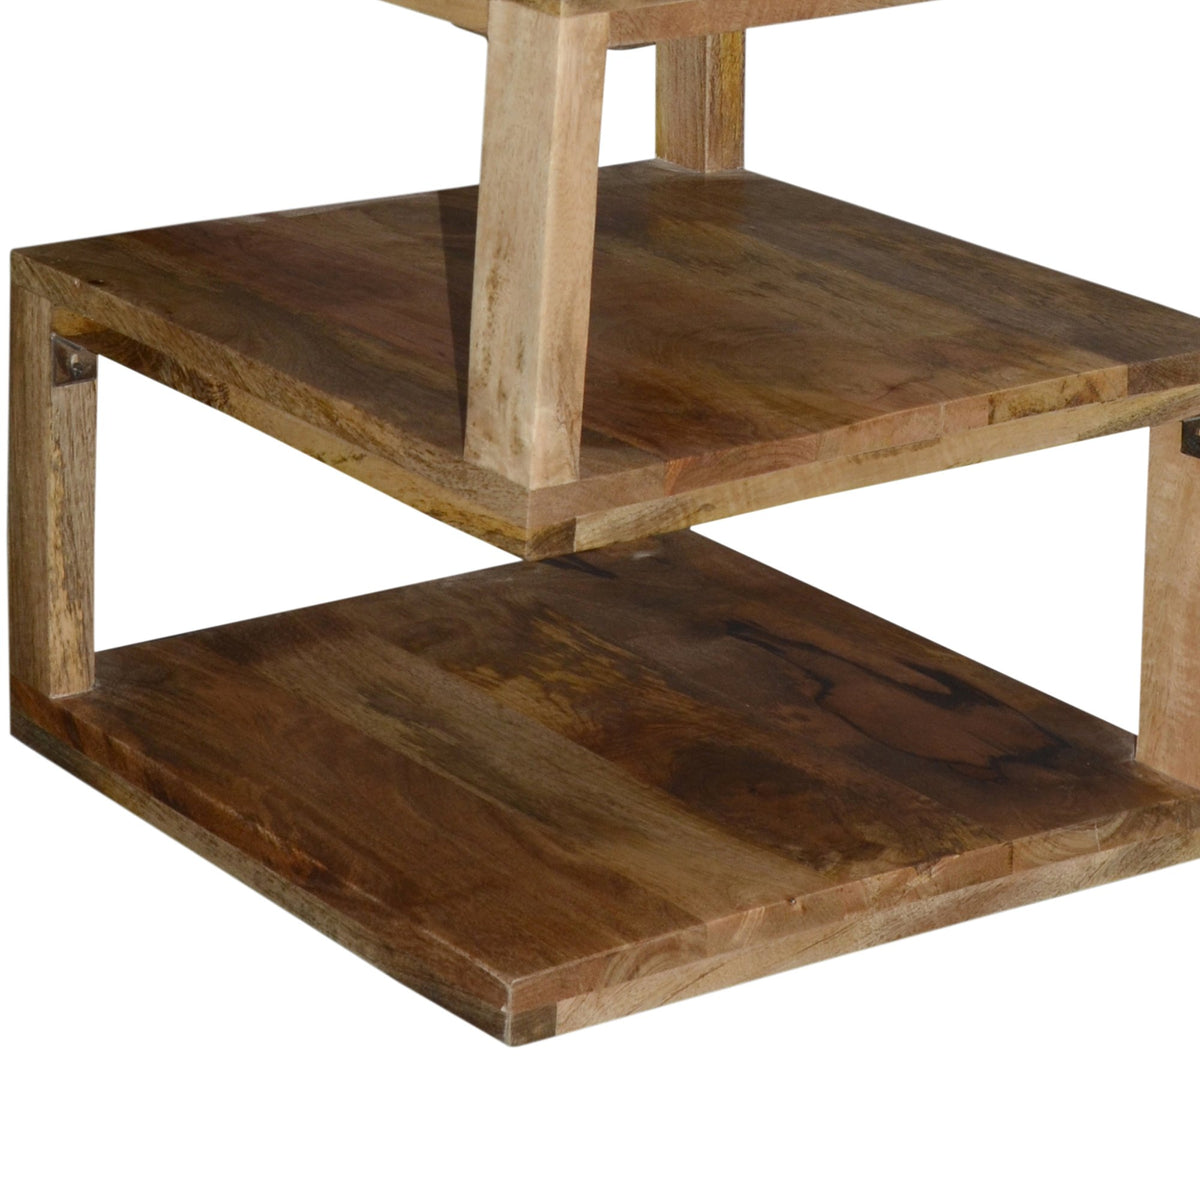 Etagere Stacked Cube Design Mango Wood End SideTable with 3 Shelves, Brown - UPT-213130